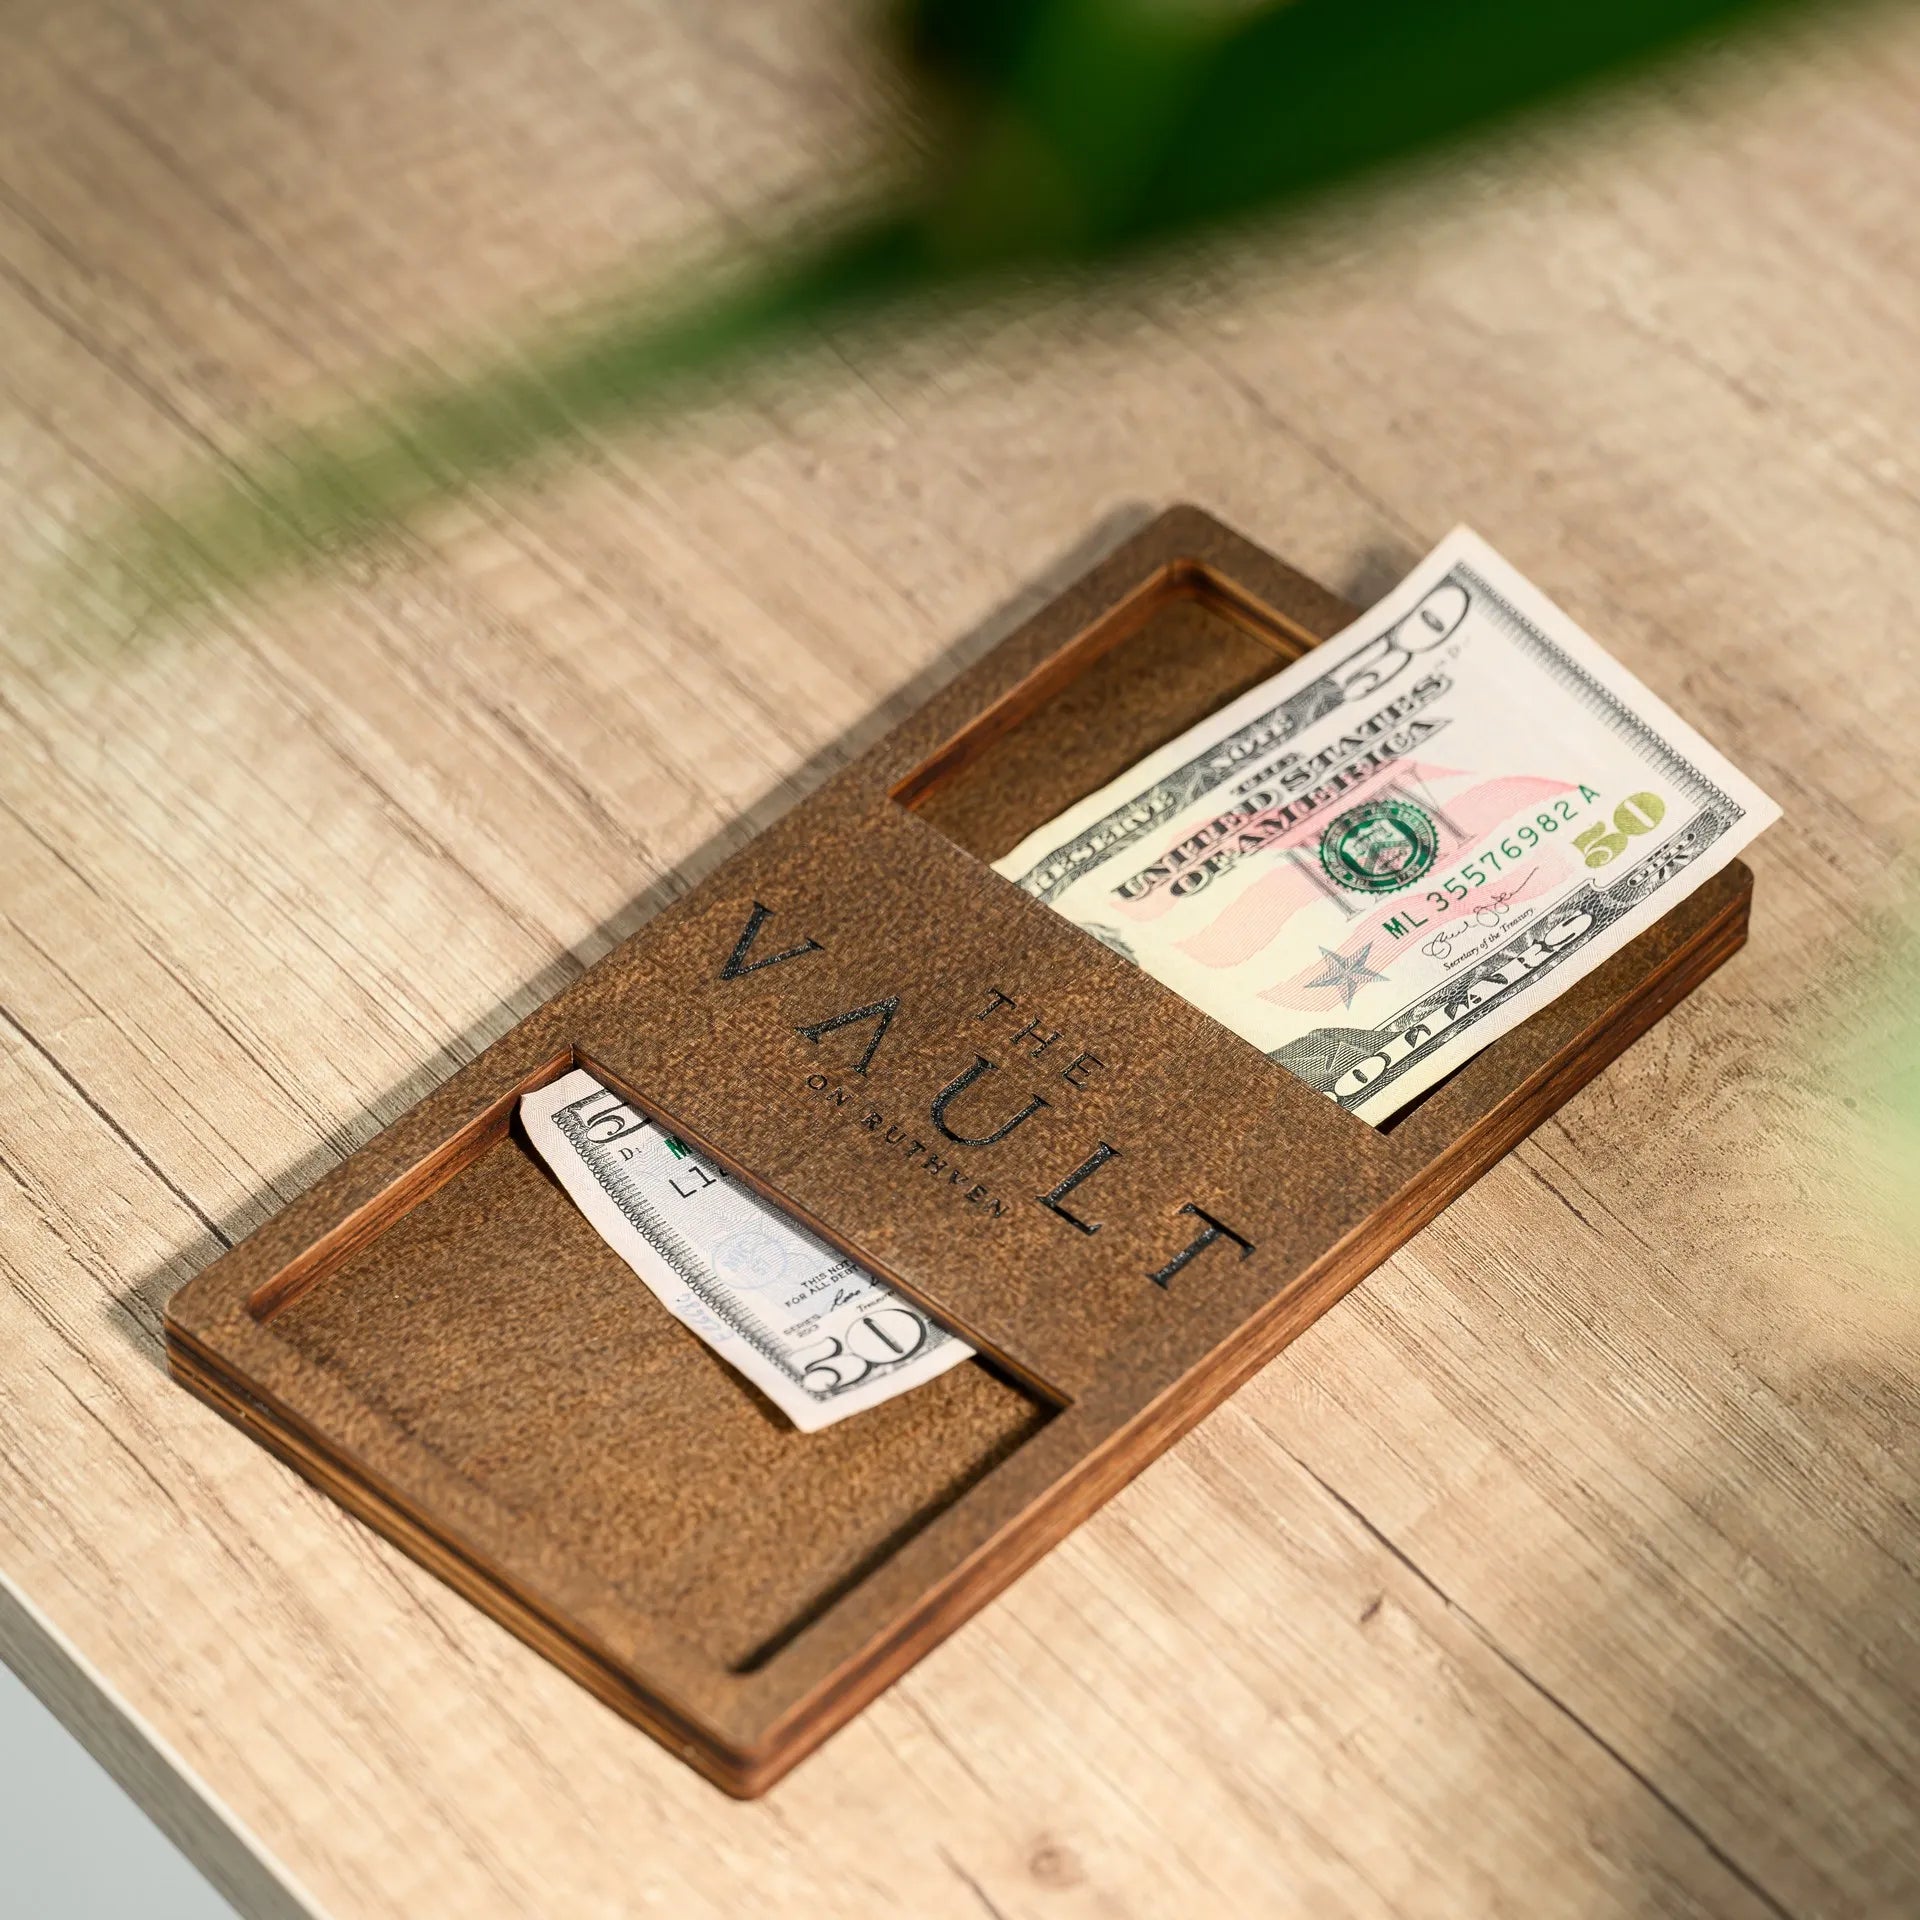 Stylish wooden bill presenter for cafes and bars, perfect for presenting guest checks with elegance and durability.